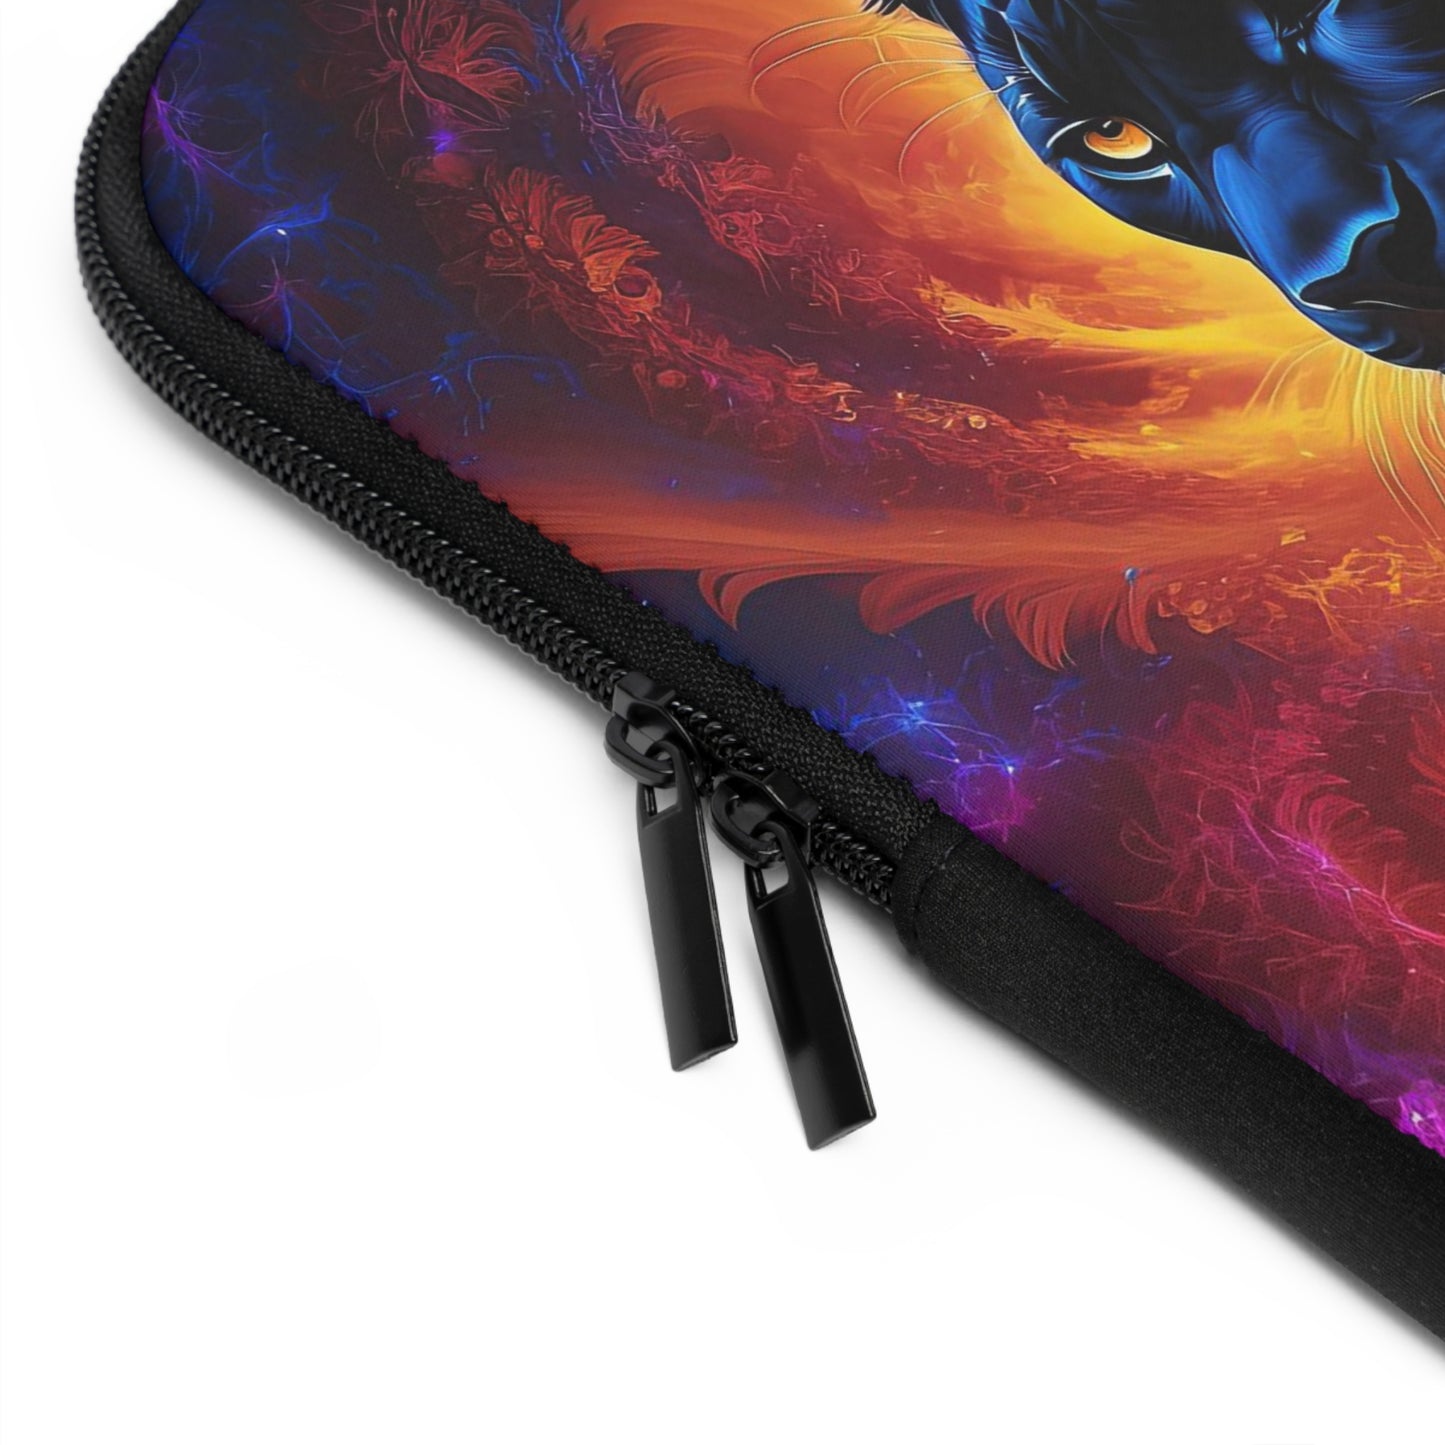 Onyx Prowl Panther's Palette Laptop Sleeve